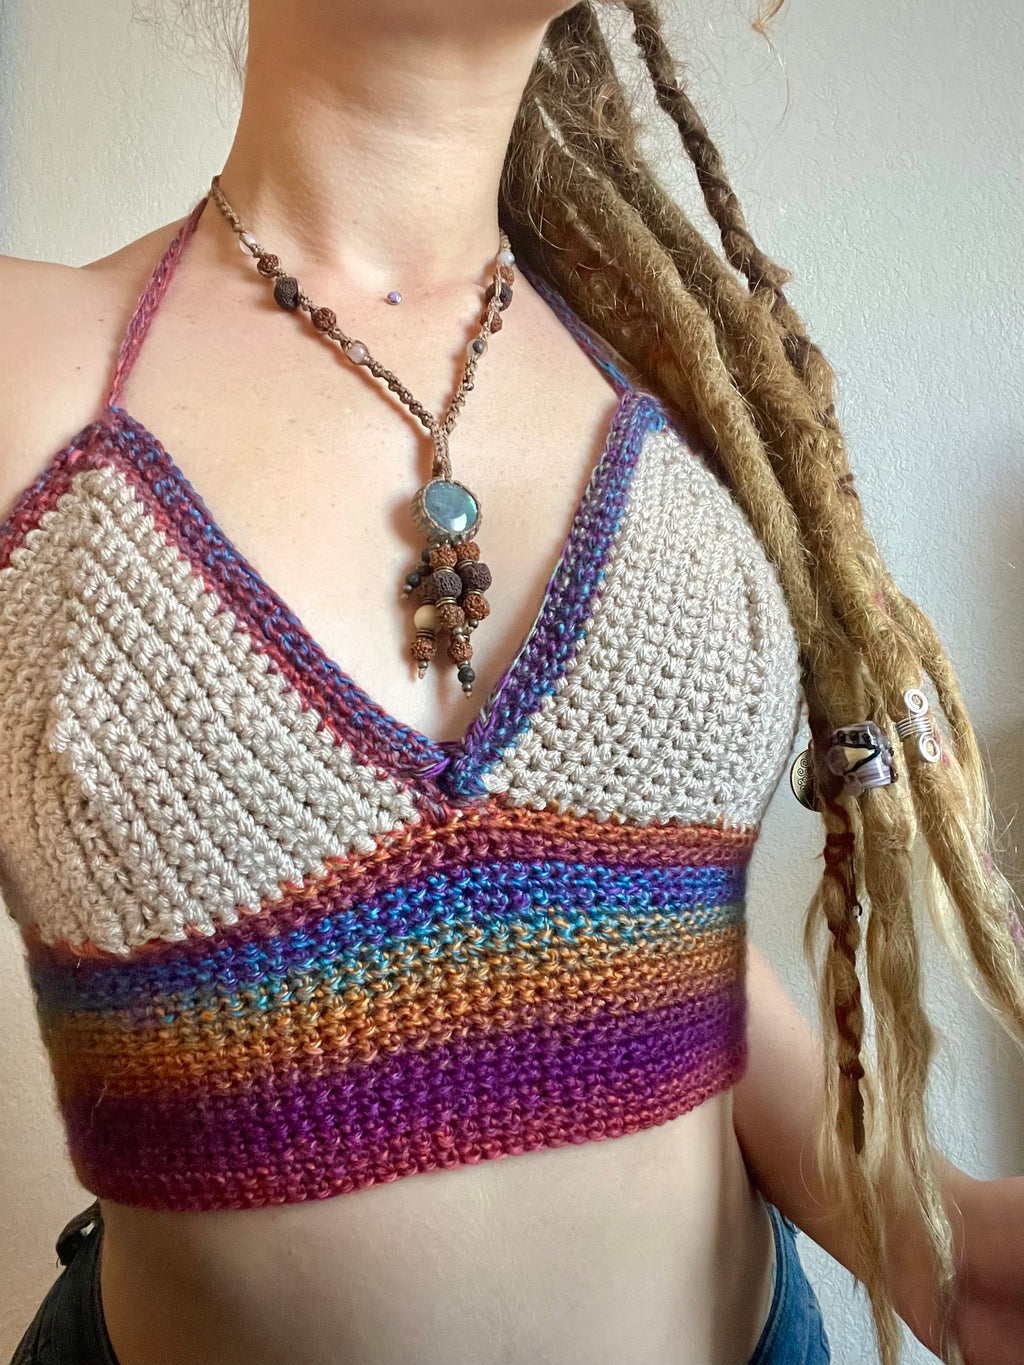 ~ Rainbow Halter Top With Corset ~ Cup Size B/C